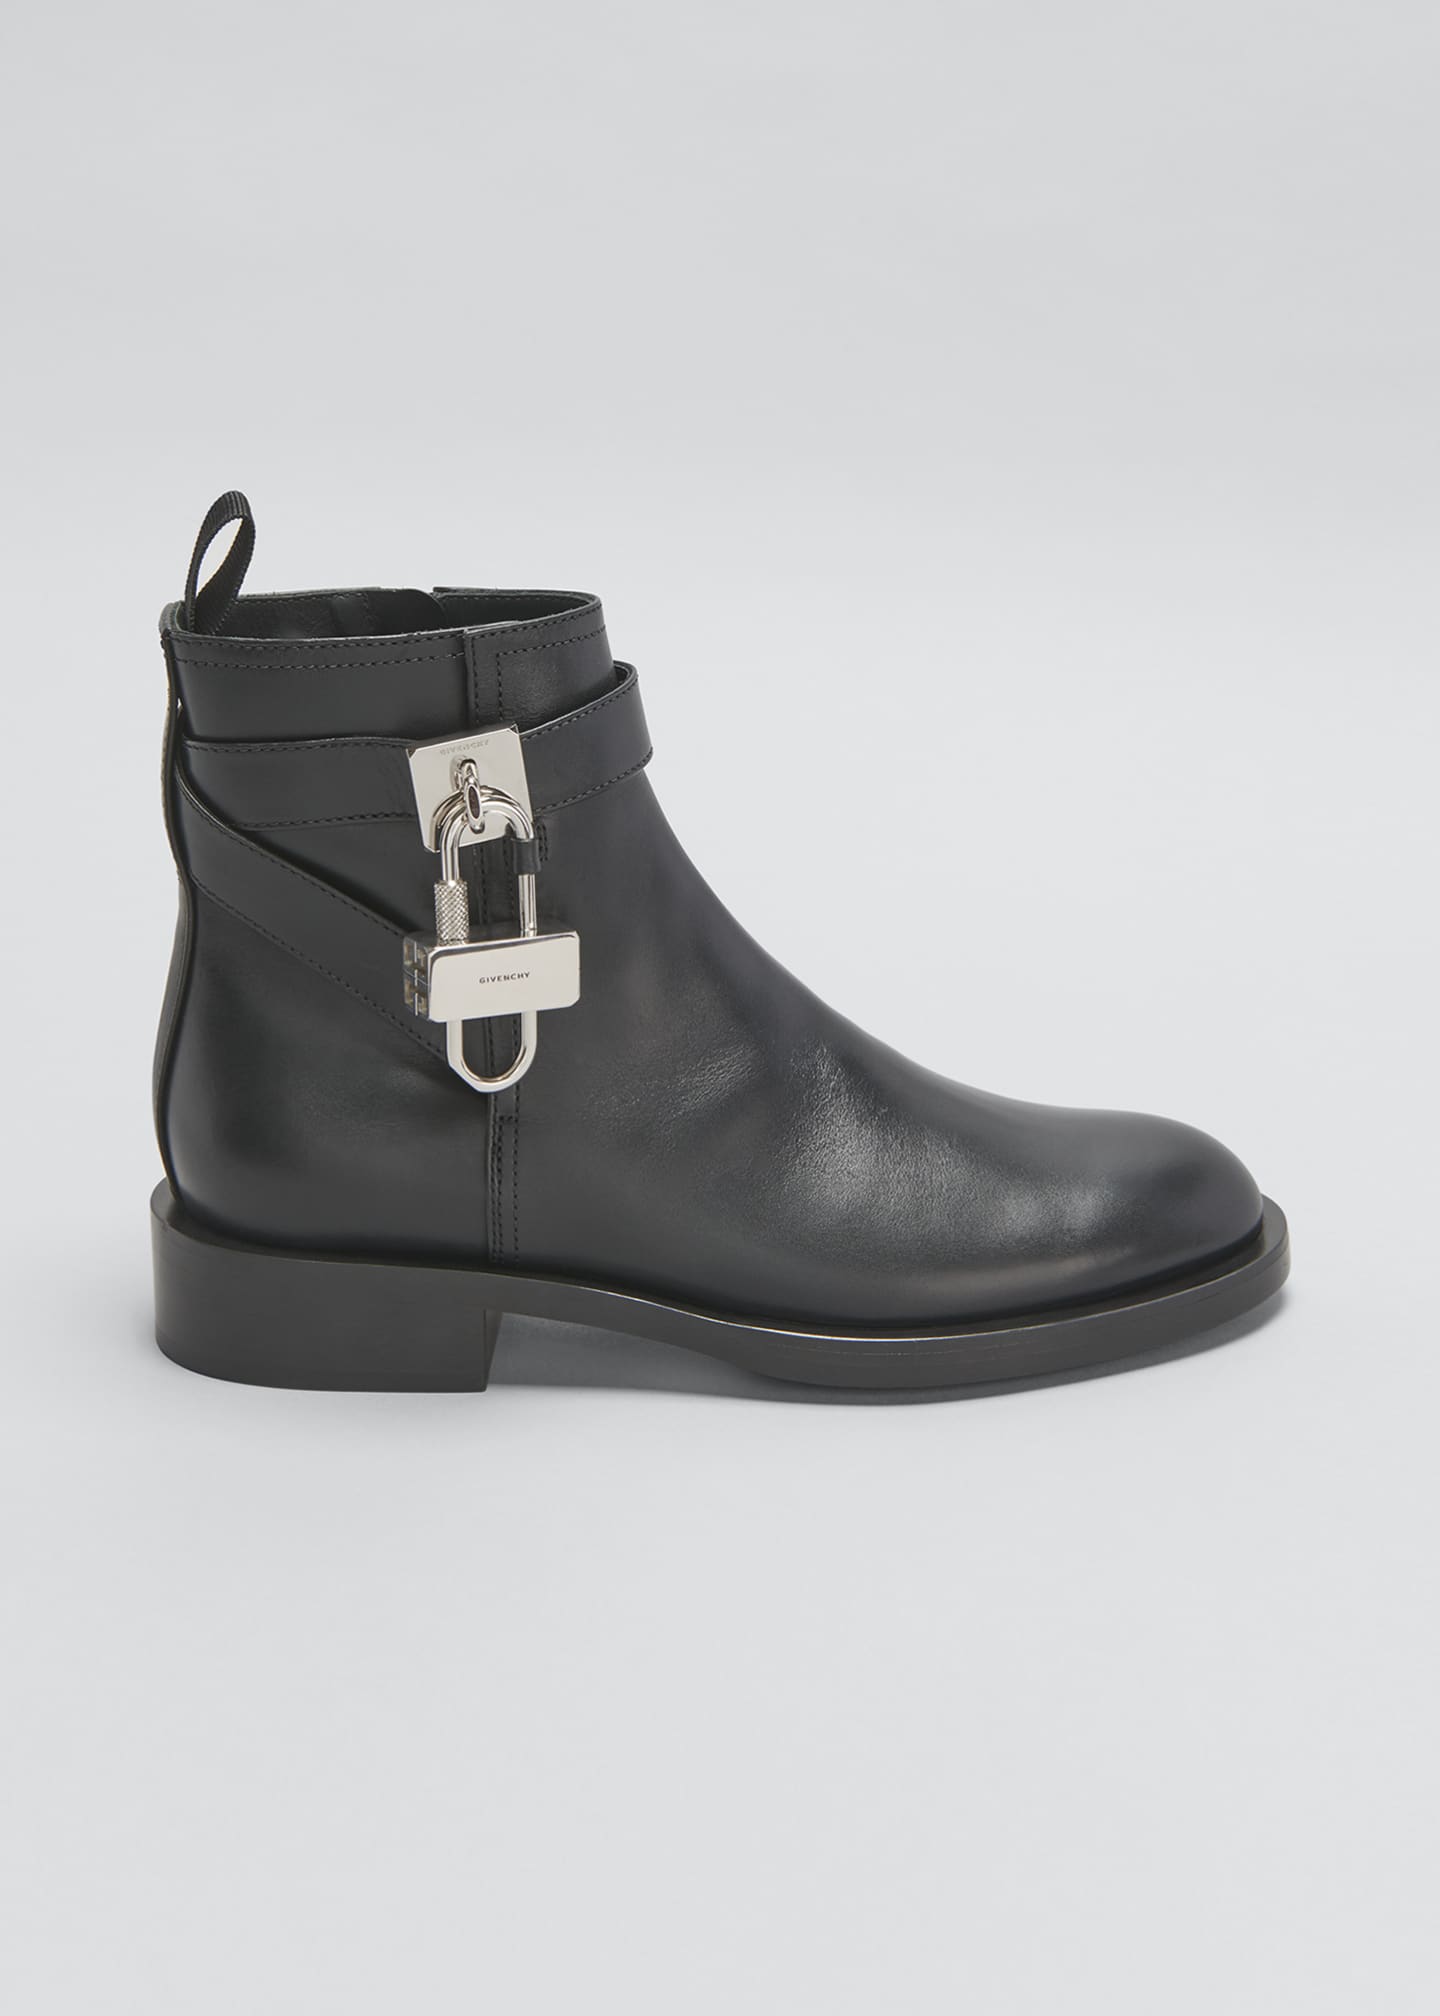 Givenchy 4G Lock Ankle Booties - Bergdorf Goodman